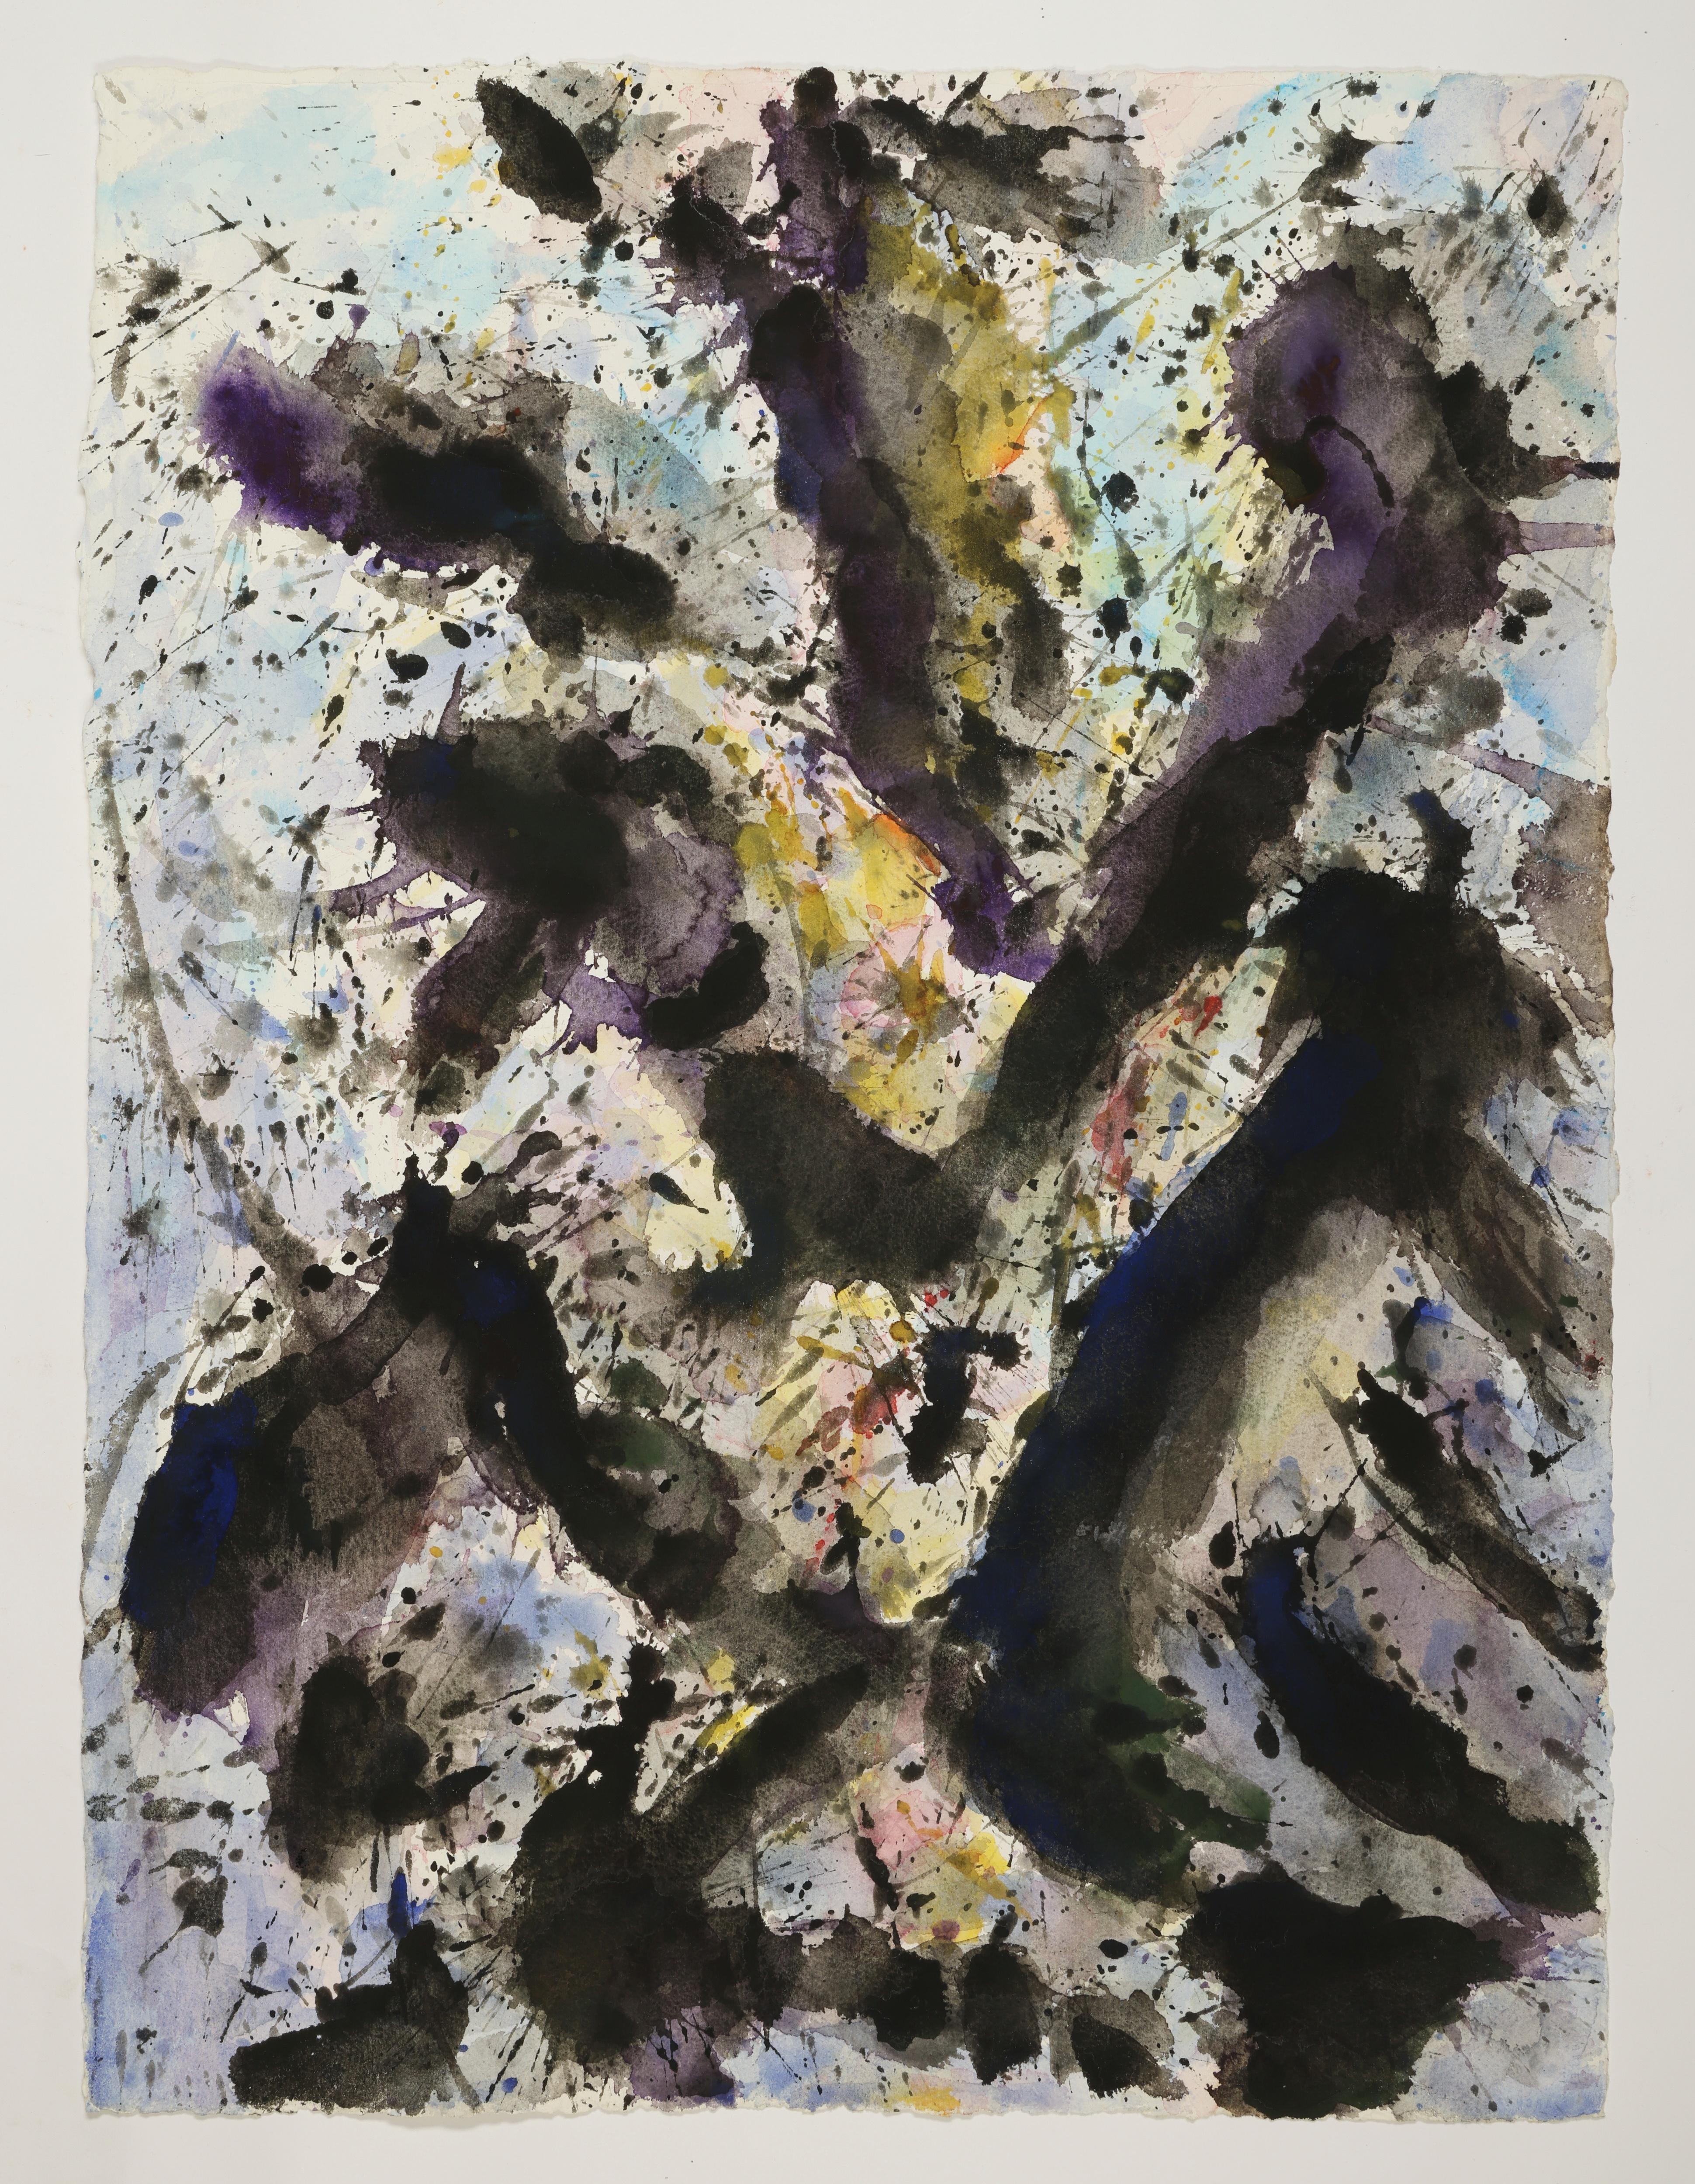 Abstract Watercolor Painting, 'Design for Space', C. 1998 by David Ruth